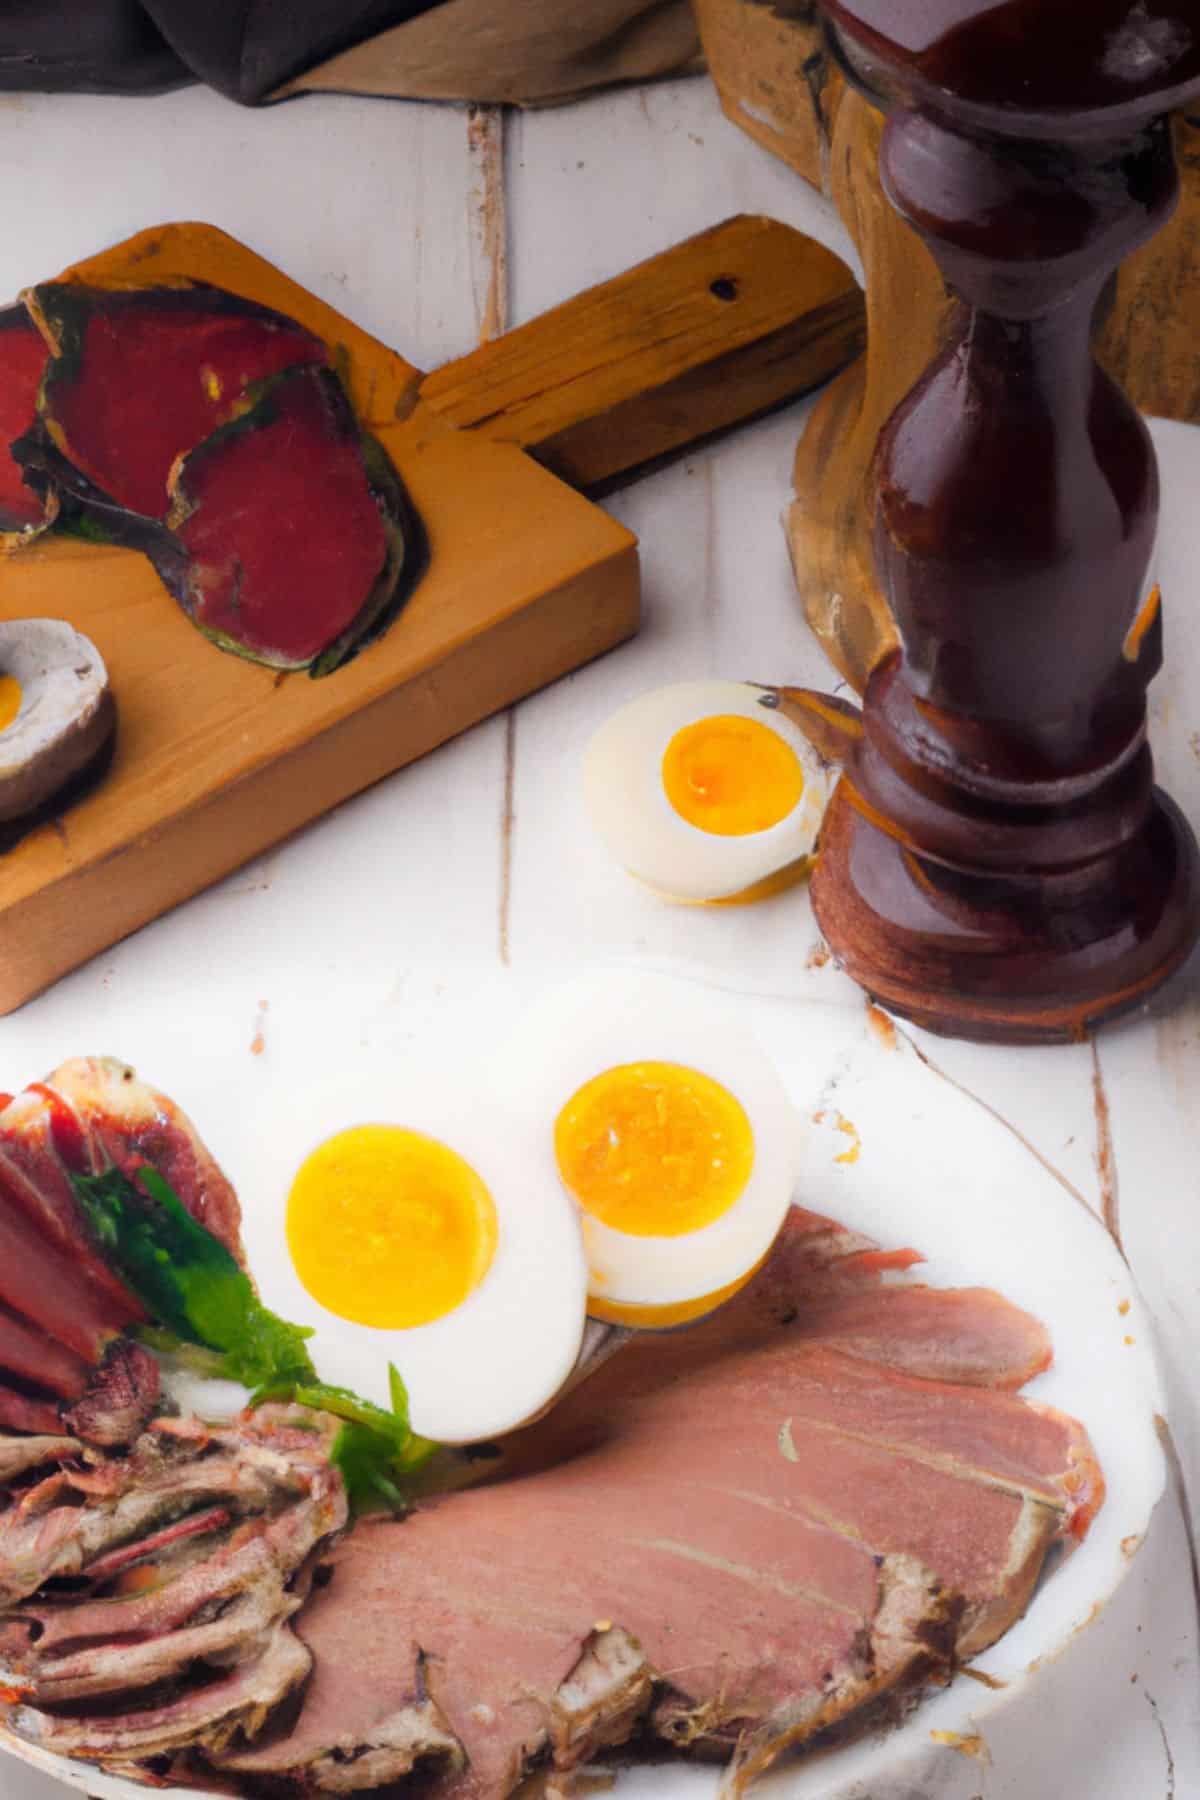 Table with a cutting board with meat, a pepper grinder and a plate with different meats and boiled eggs.